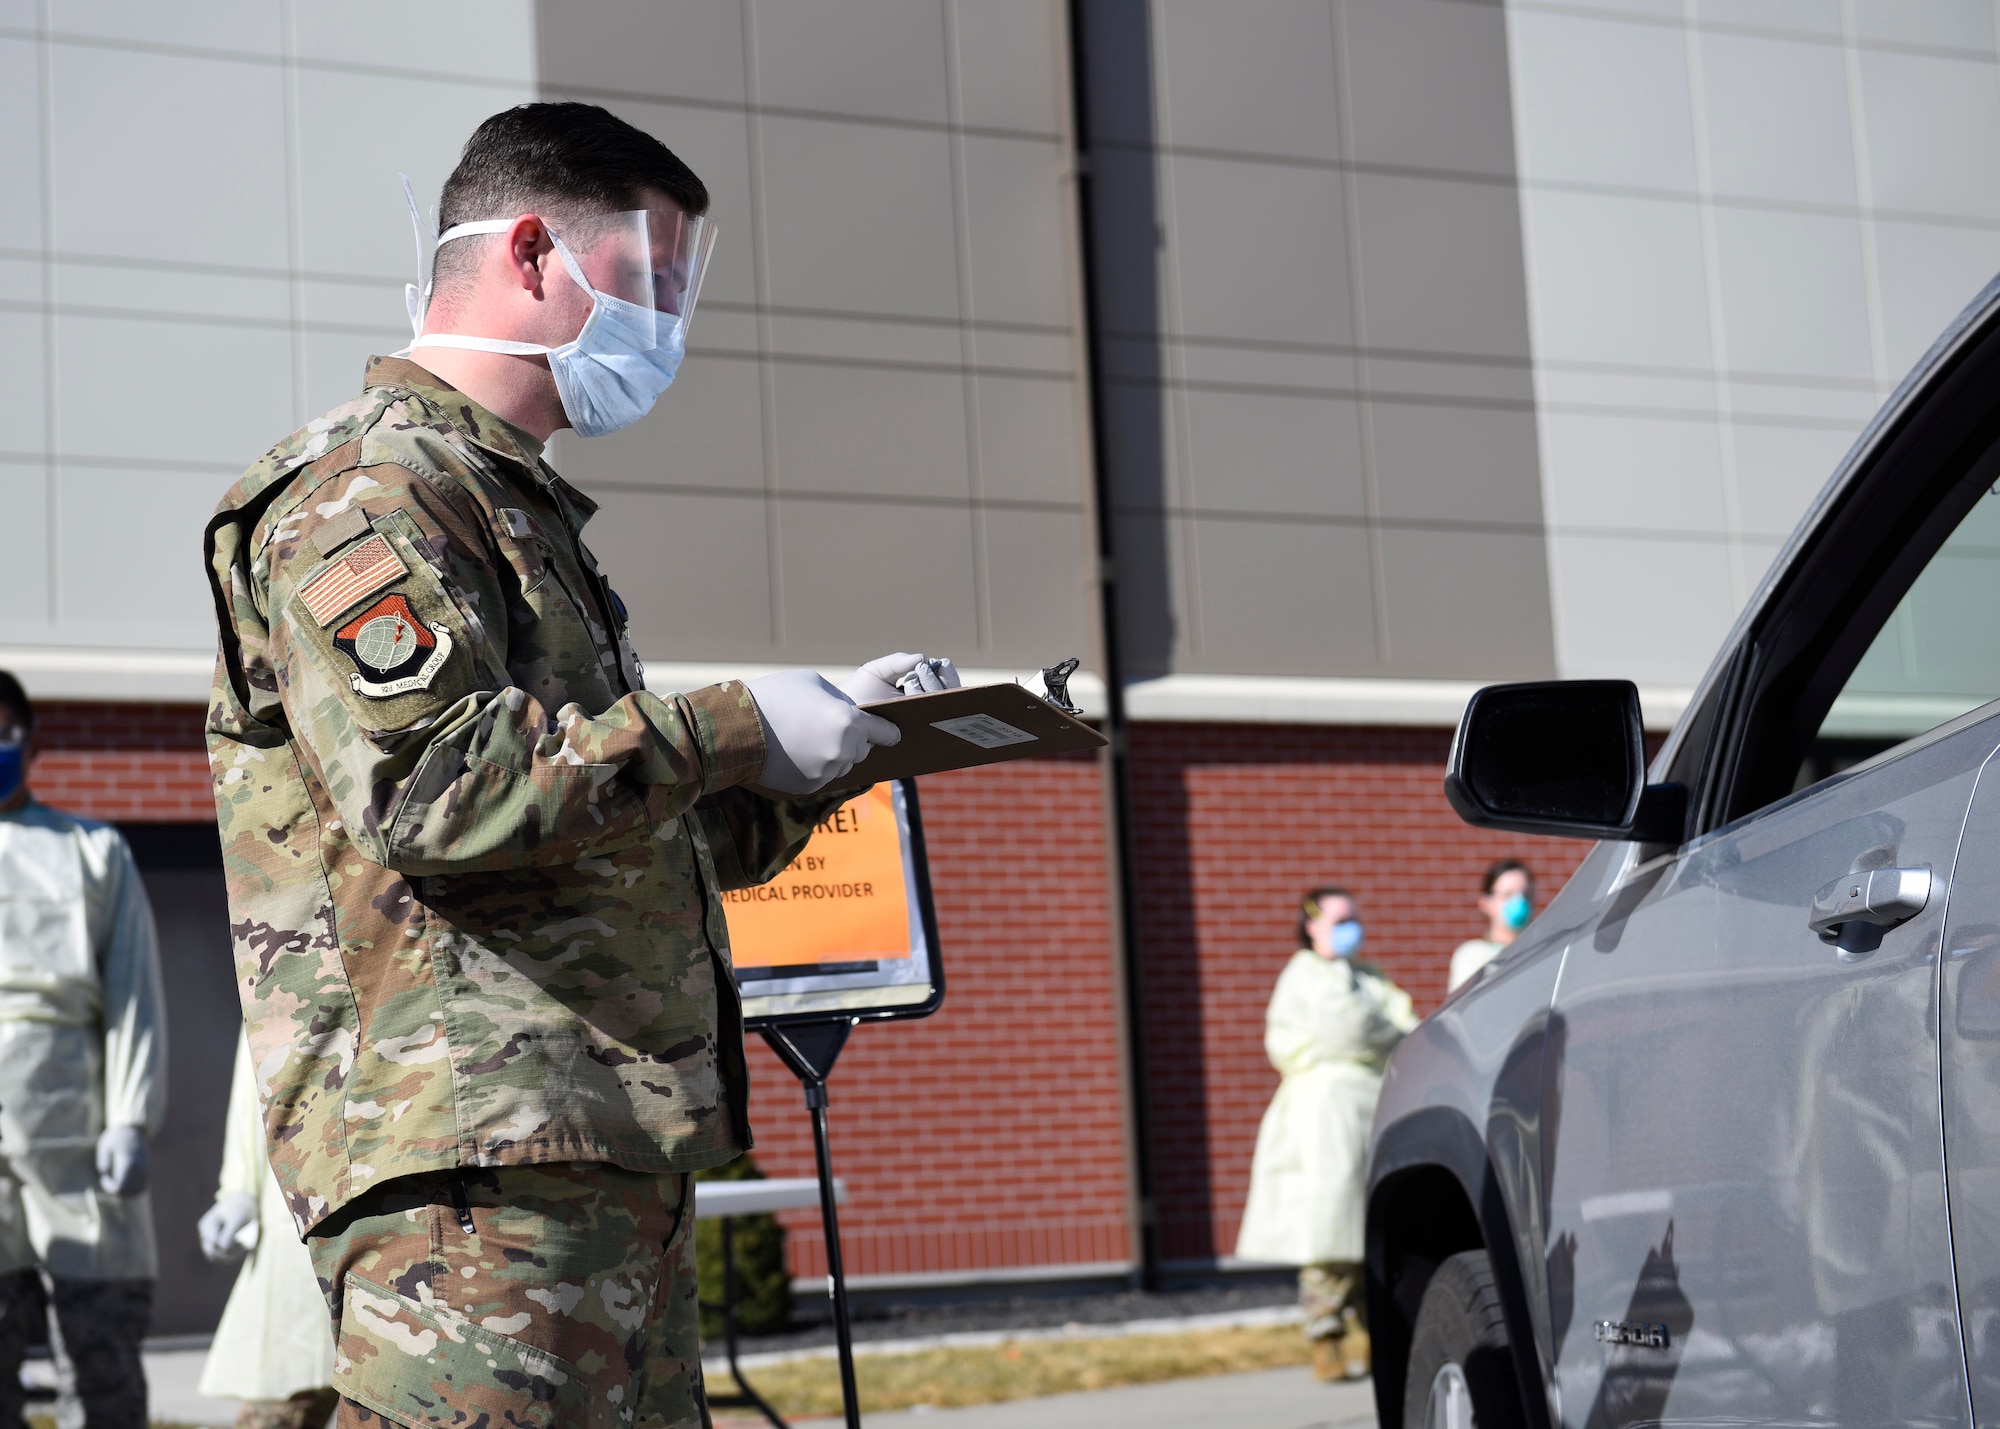 92nd Medical Group Airmen screen a patient prior to their entrance into the 92nd MDG on Fairchild Air Force Base, Washington, March 17, 2020. All visitors to the 92nd MDG must go through this screening process to prevent the spread of COVID-19. (U.S. Air Force photo by Senior Airman Lawrence Sena)